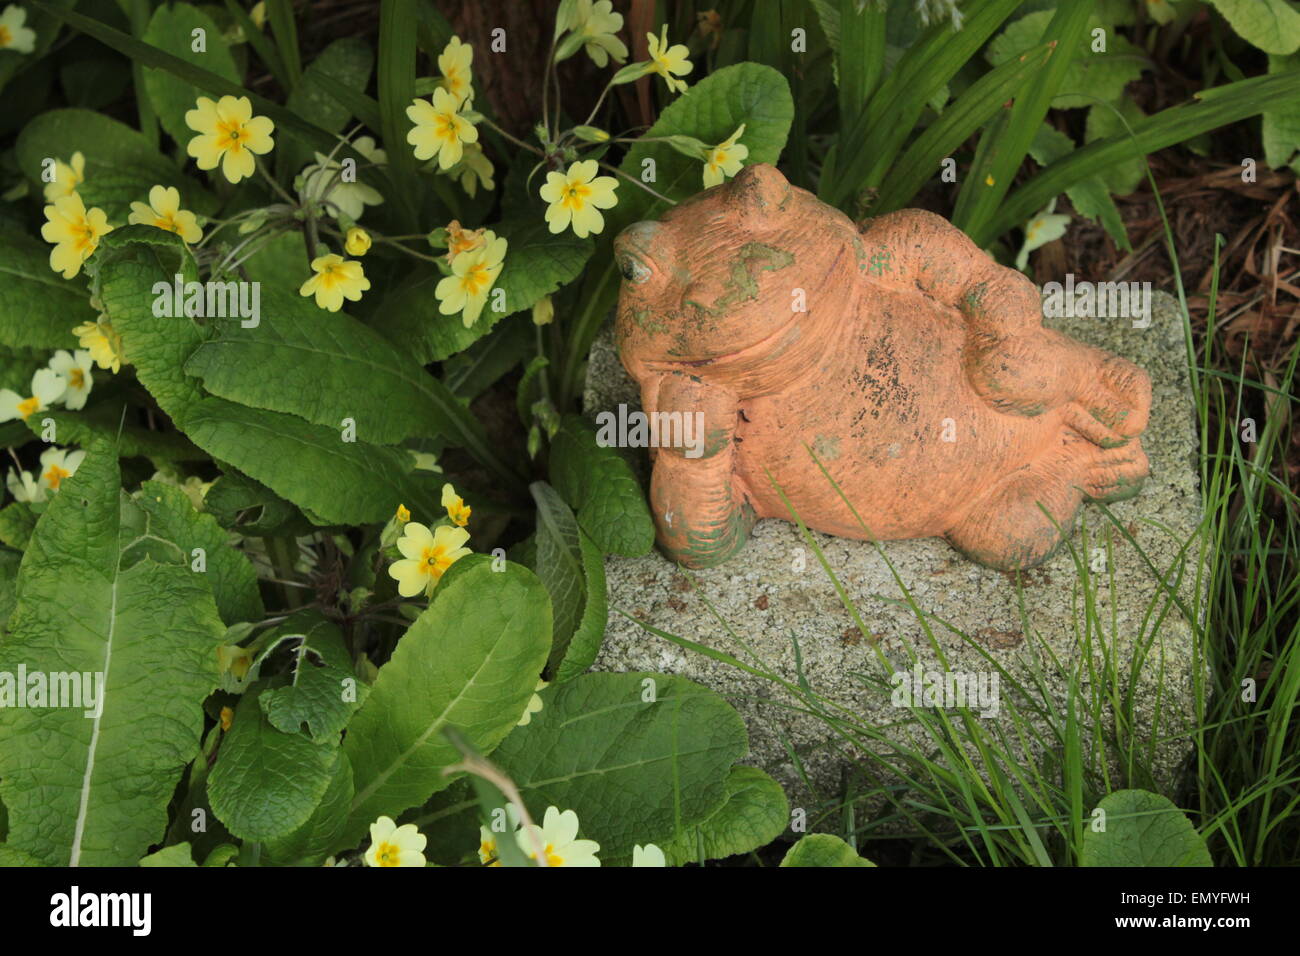 A small frog fishing with a fishing rod ornament in a green lake Stock  Photo - Alamy